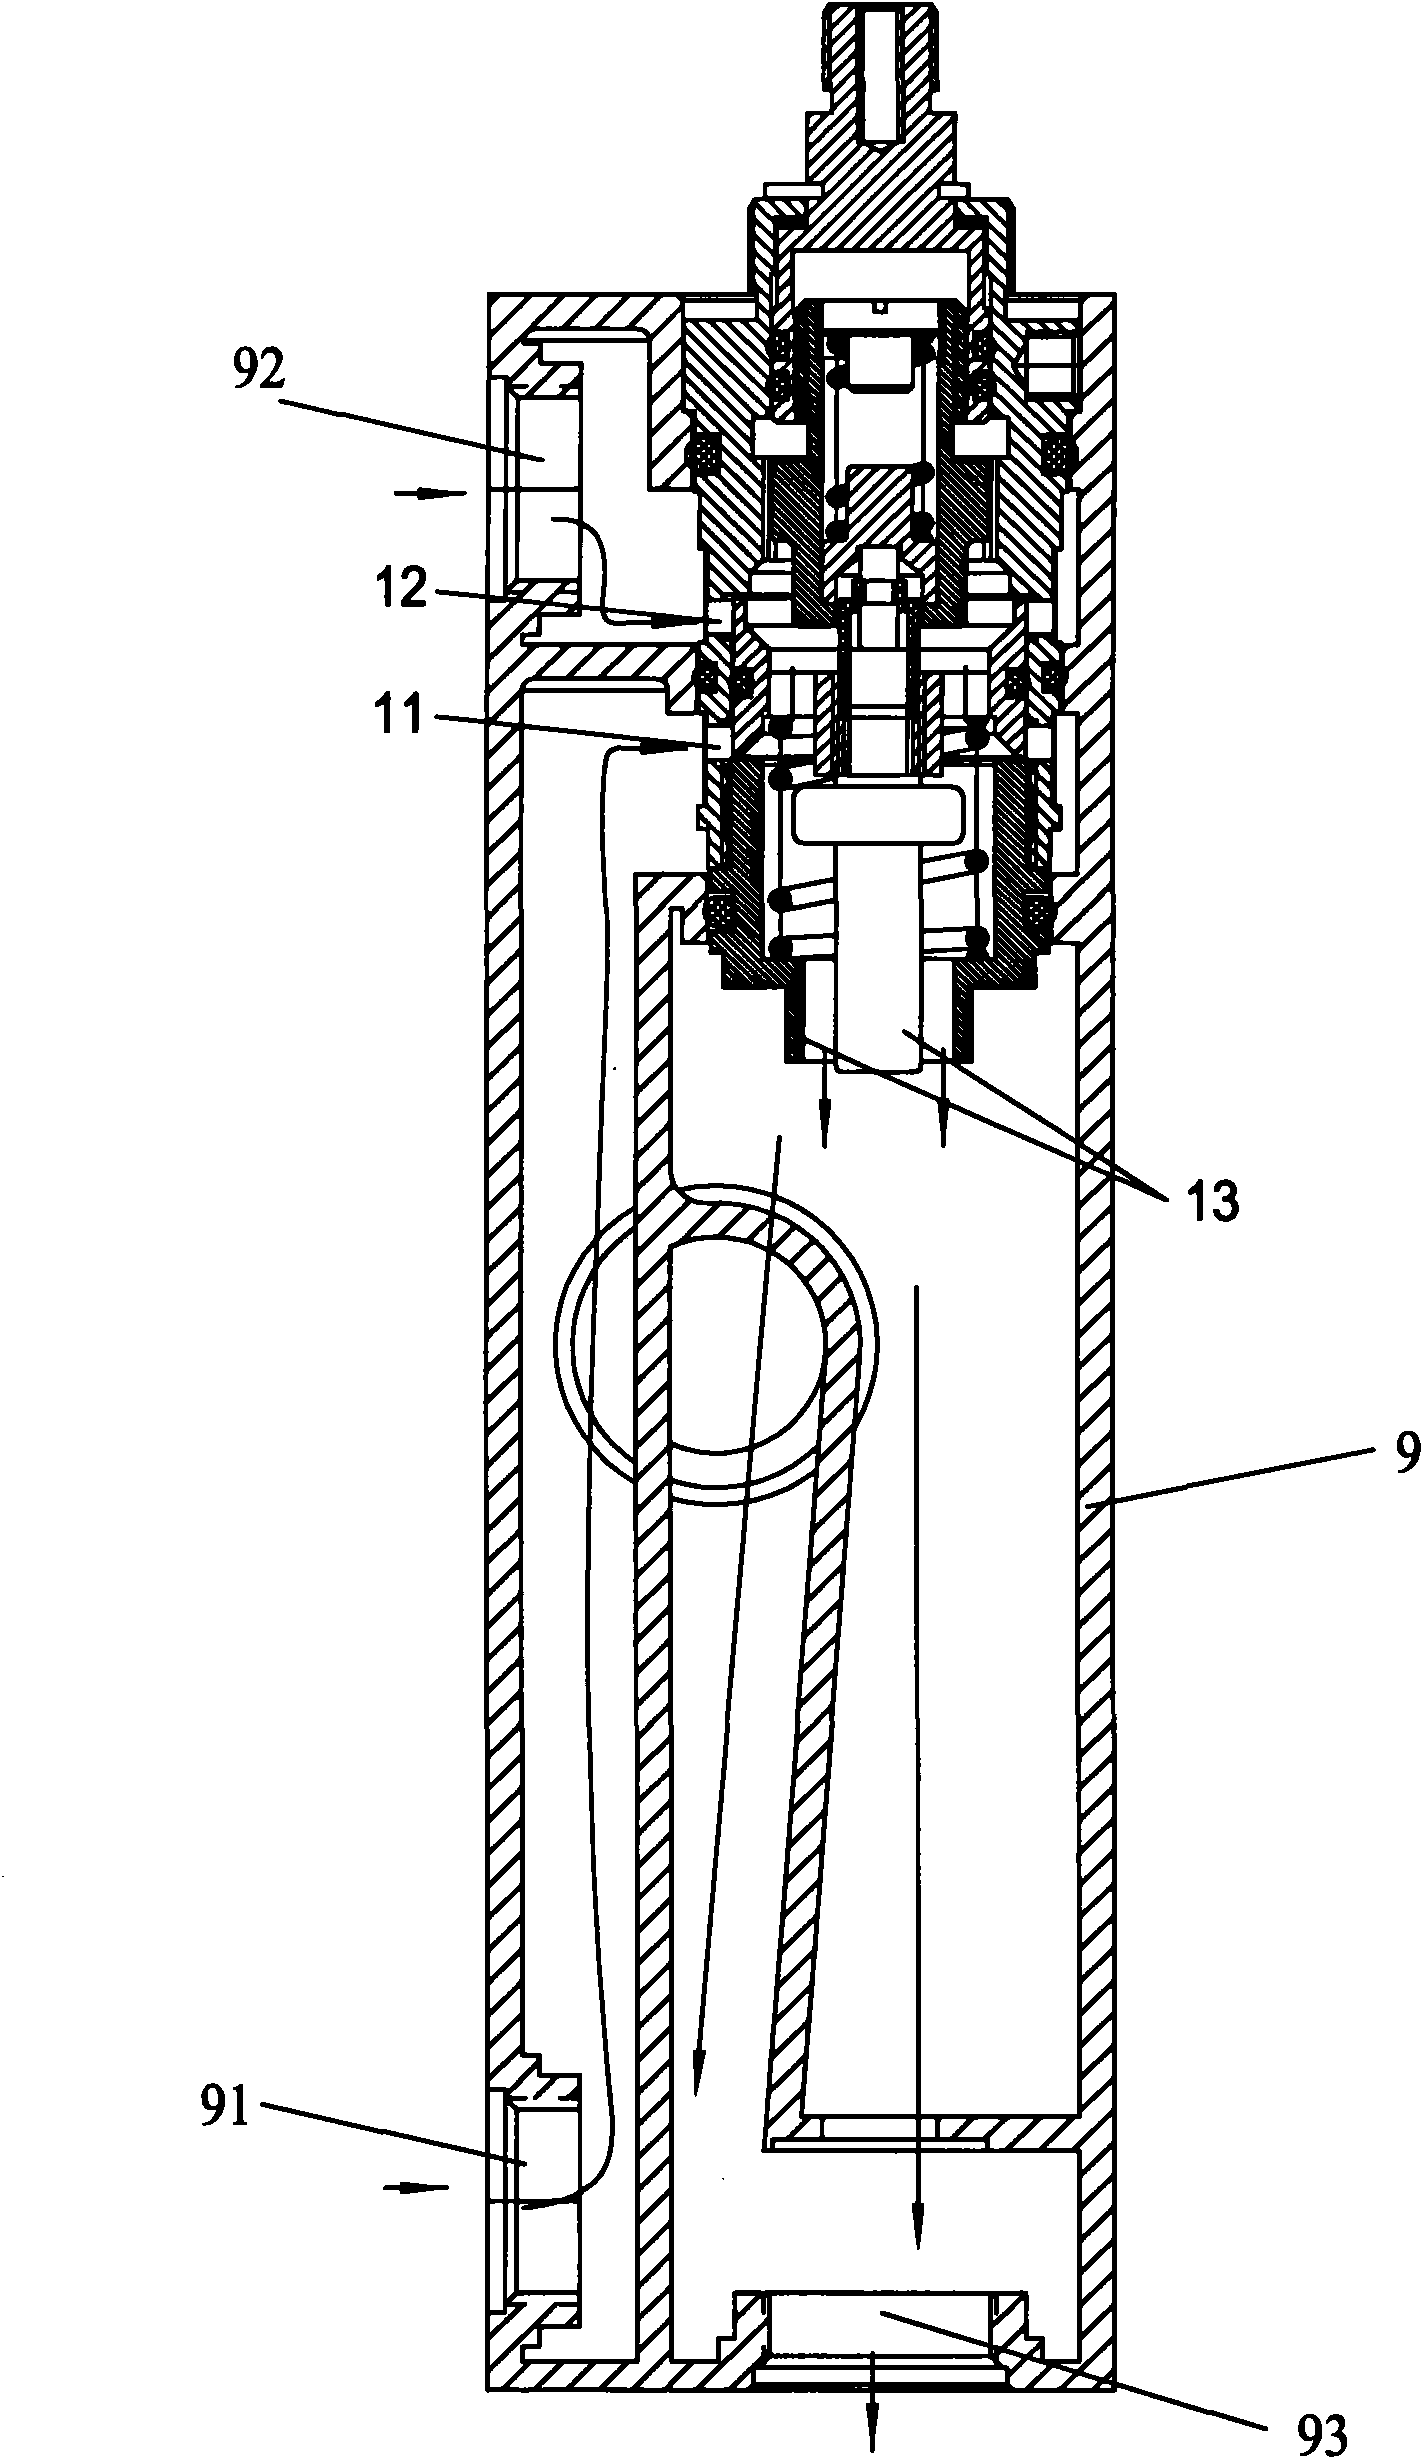 Temperature-sensing valve core with cold water inlet and hot water inlet which are exchanged